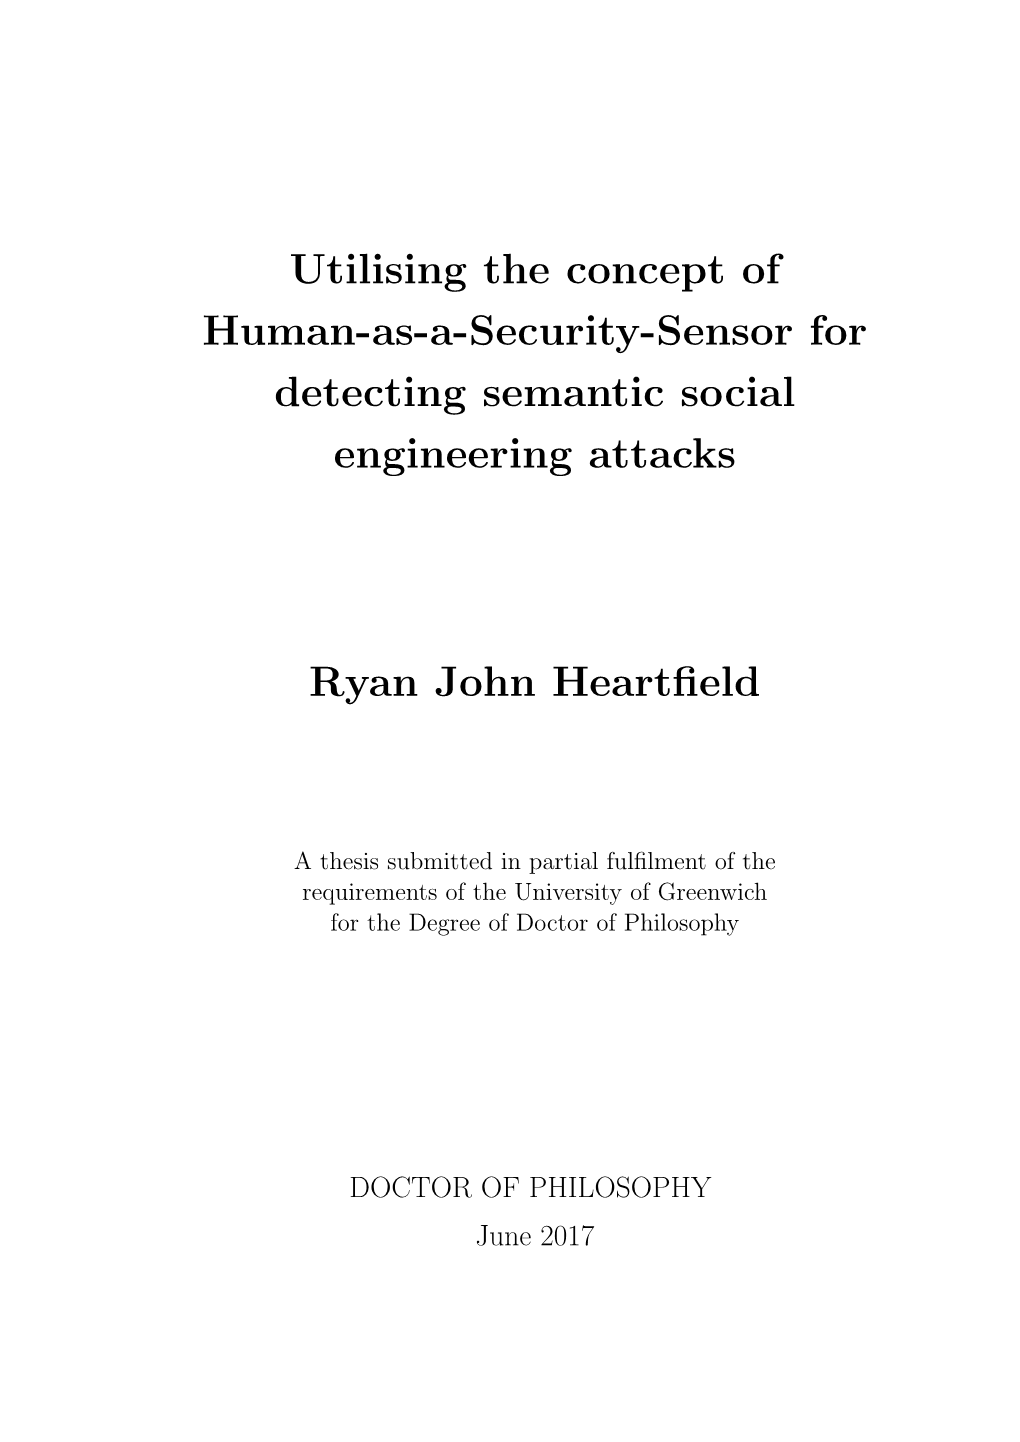 Utilising the Concept of Human-As-A-Security-Sensor for Detecting Semantic Social Engineering Attacks